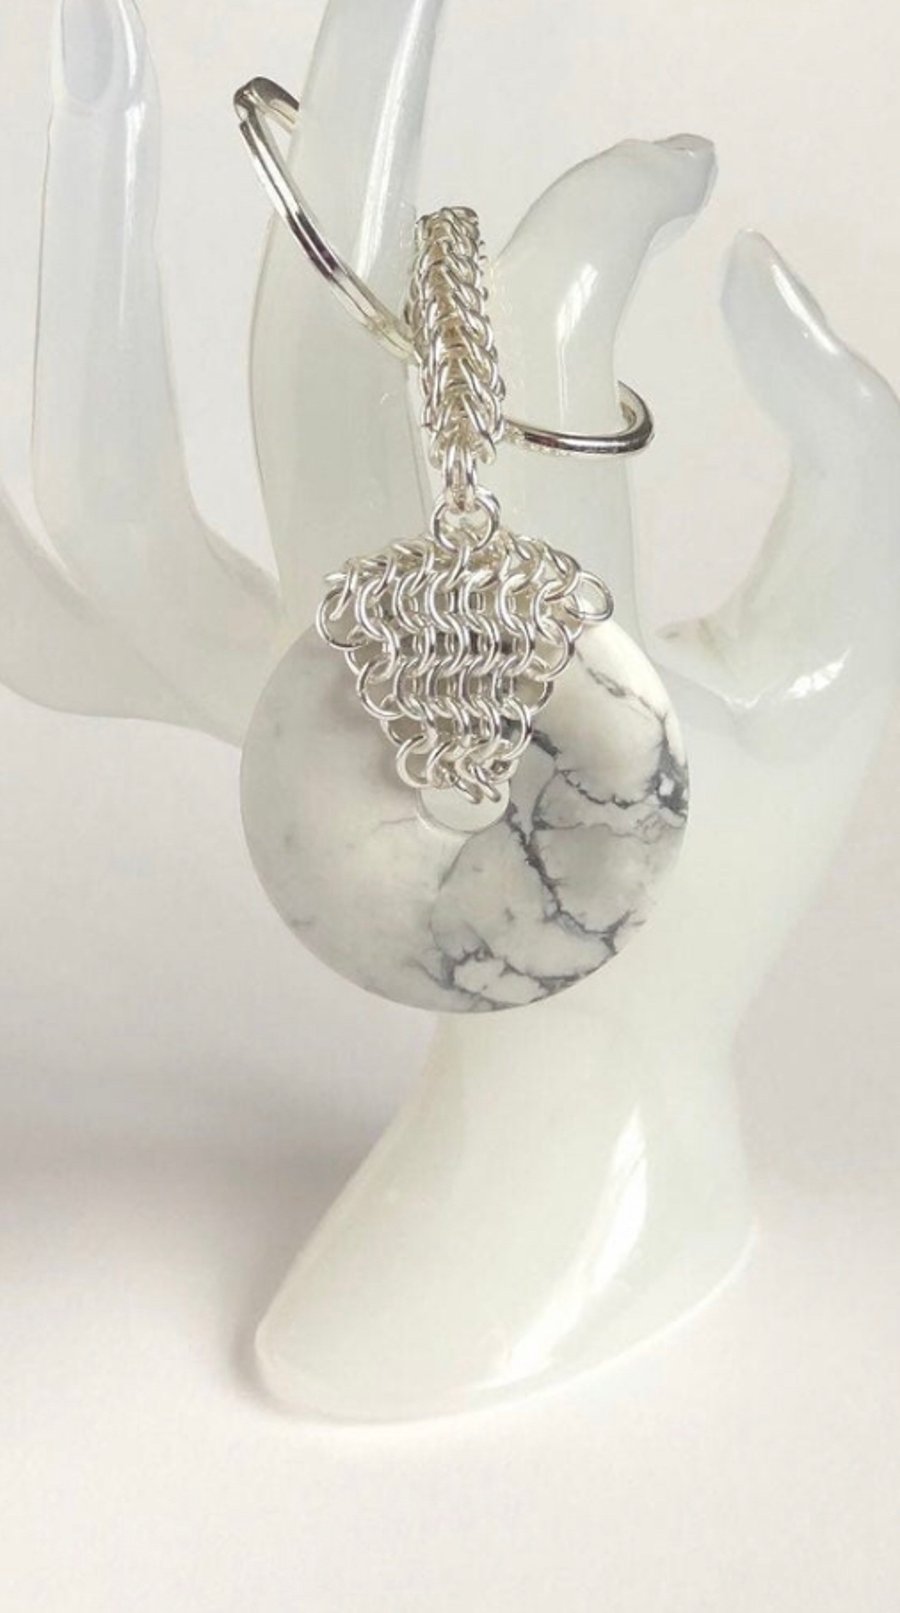 Howlite Donut Handbag Charm with Chainmaille Chain and Keyring